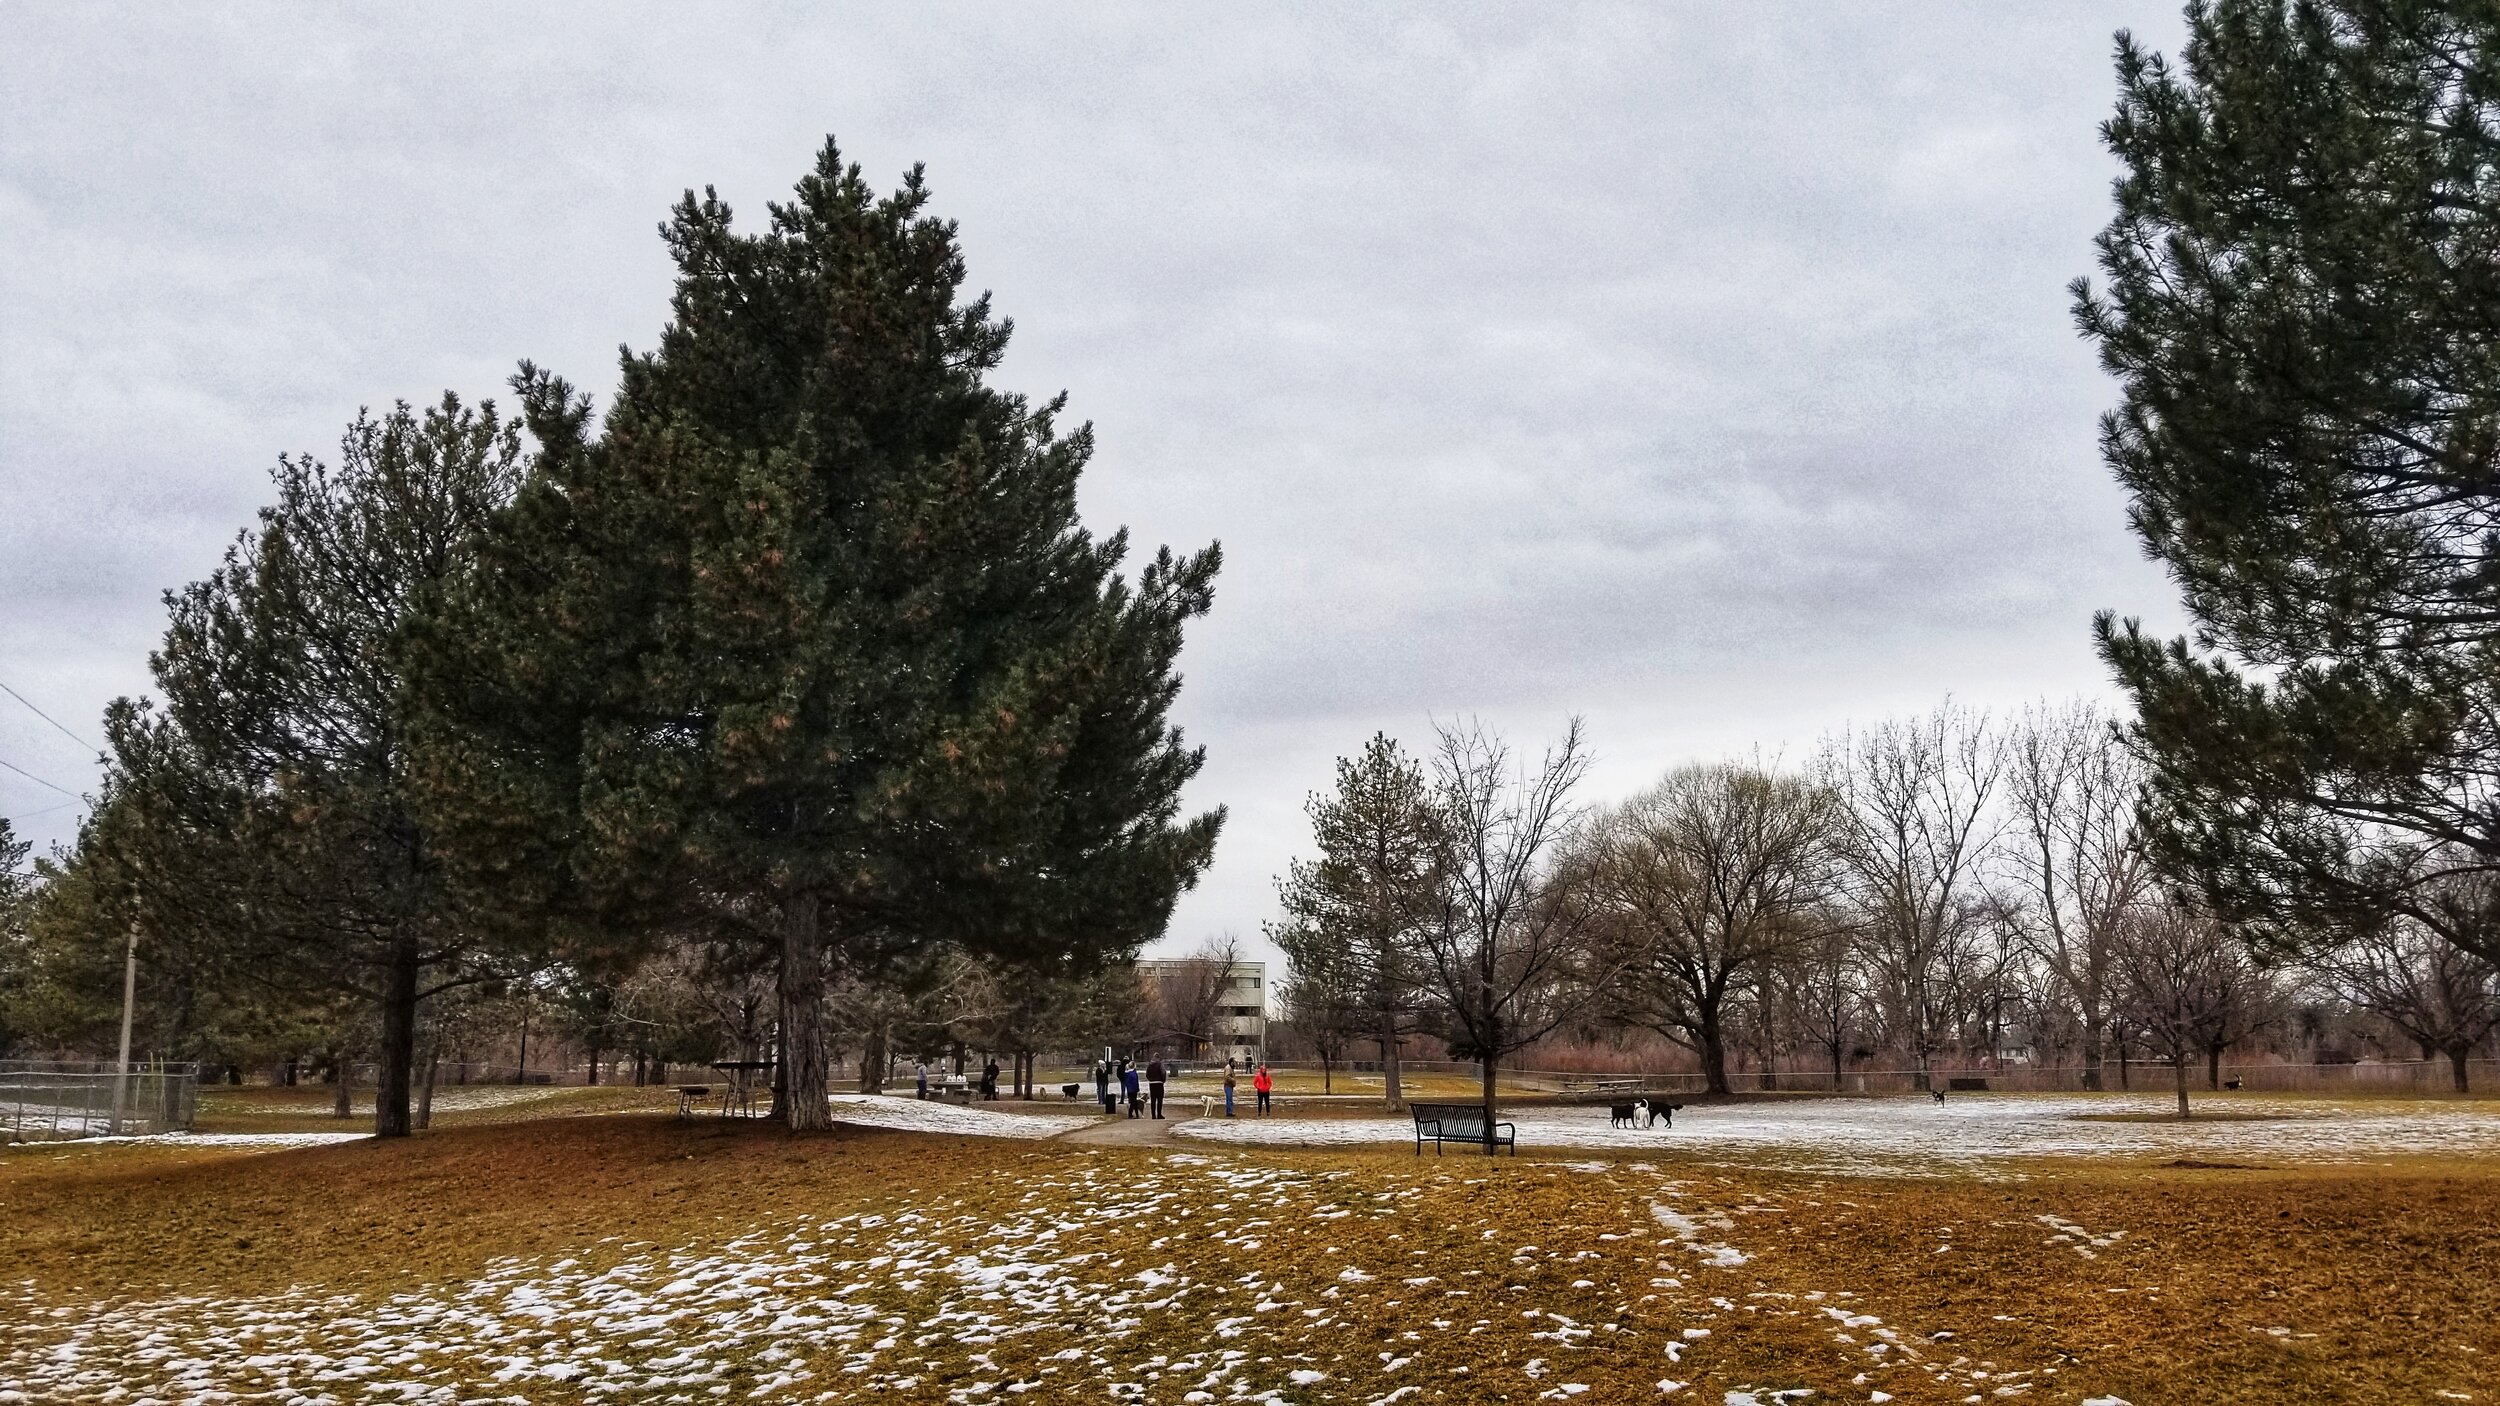 A view of a dog park during winter